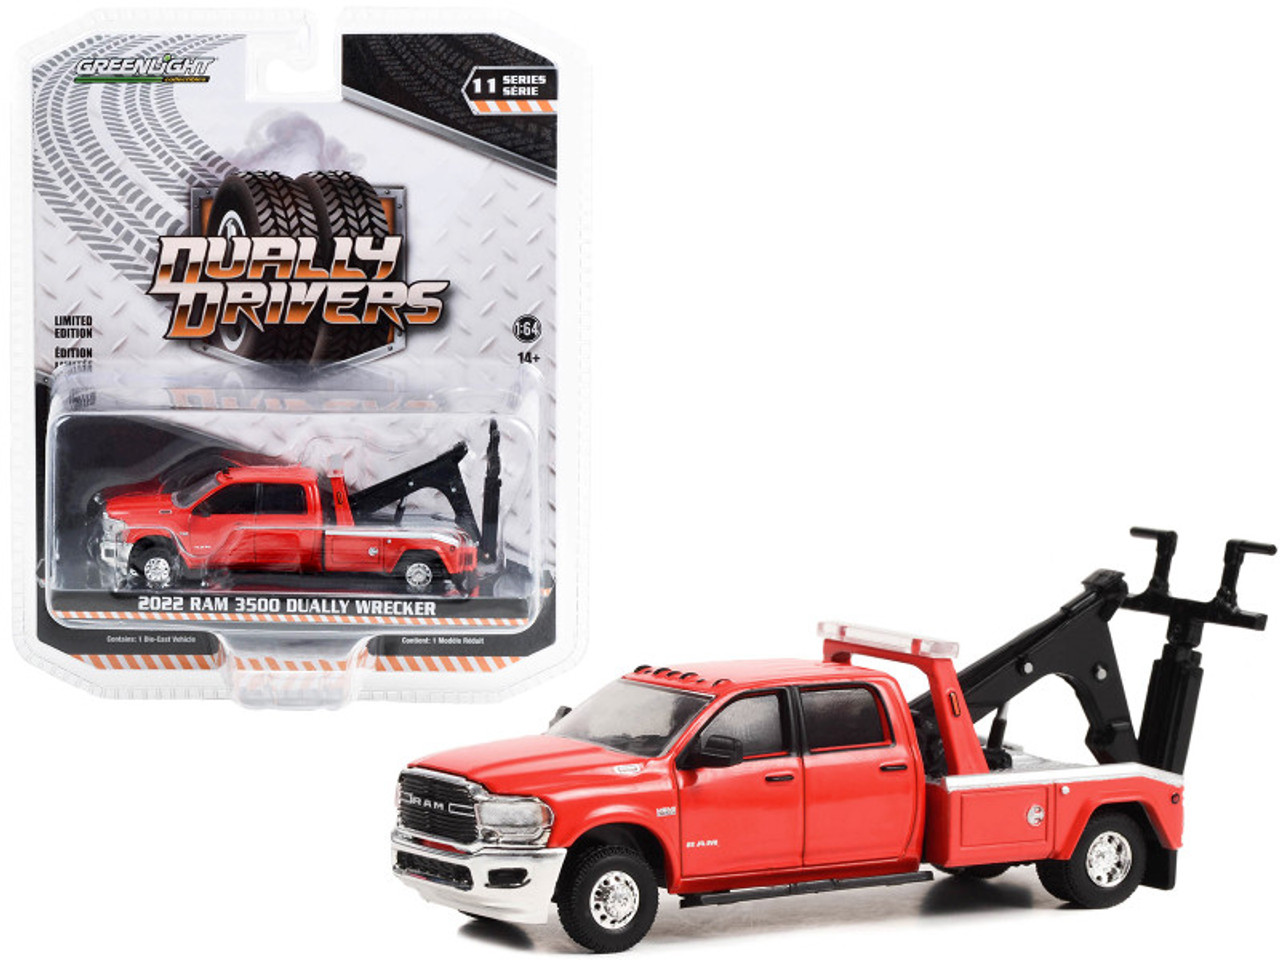 2022 Ram 3500 Dually Wrecker Tow Truck Flame Red "Dually Drivers" Series 11 1/64 Diecast Model Car by Greenlight